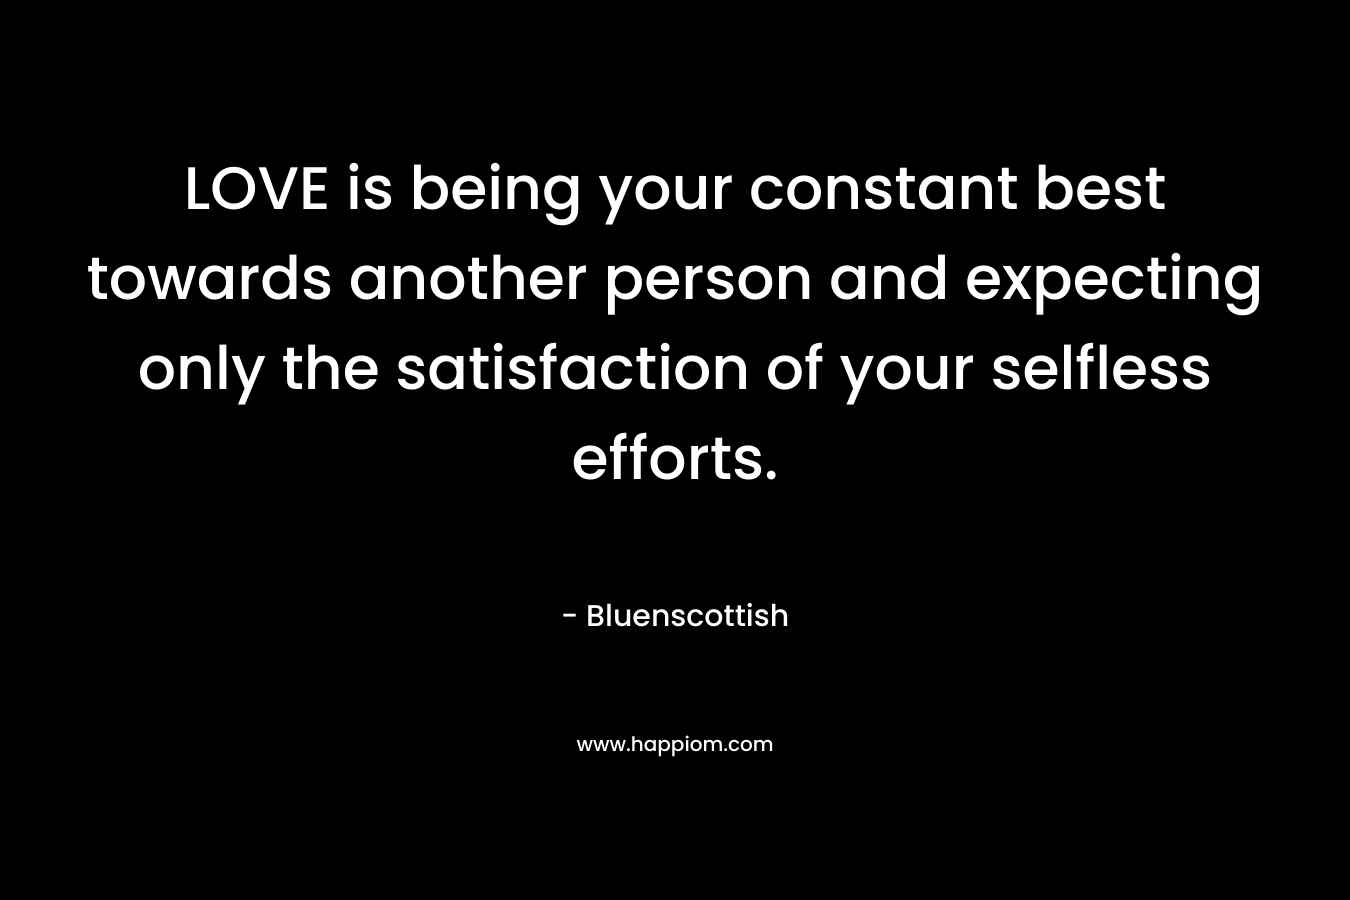 LOVE is being your constant best towards another person and expecting only the satisfaction of your selfless efforts. – Bluenscottish